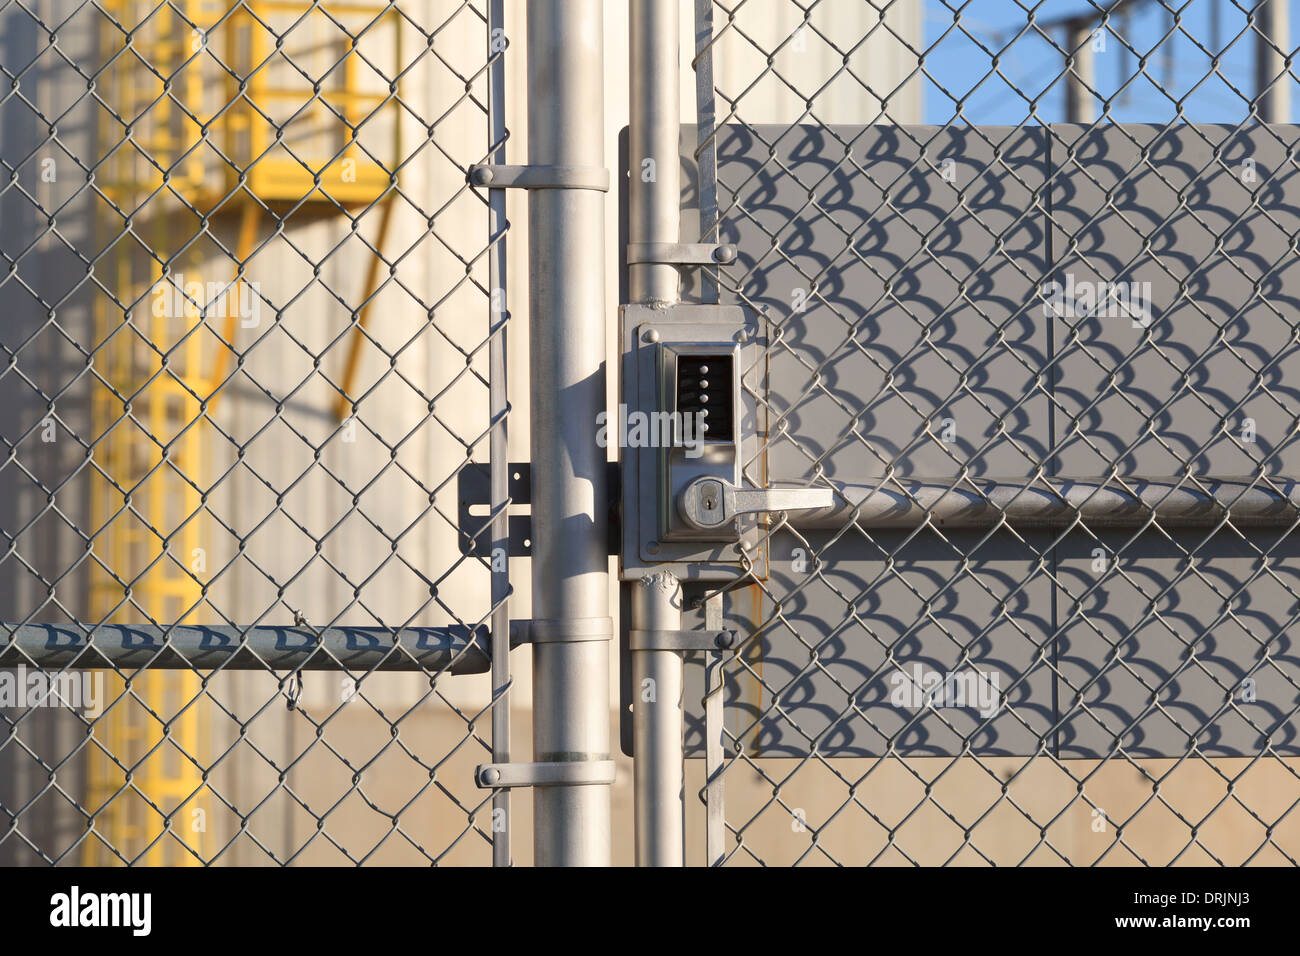 Security gate entrance to electric plant fuel tank Stock Photo